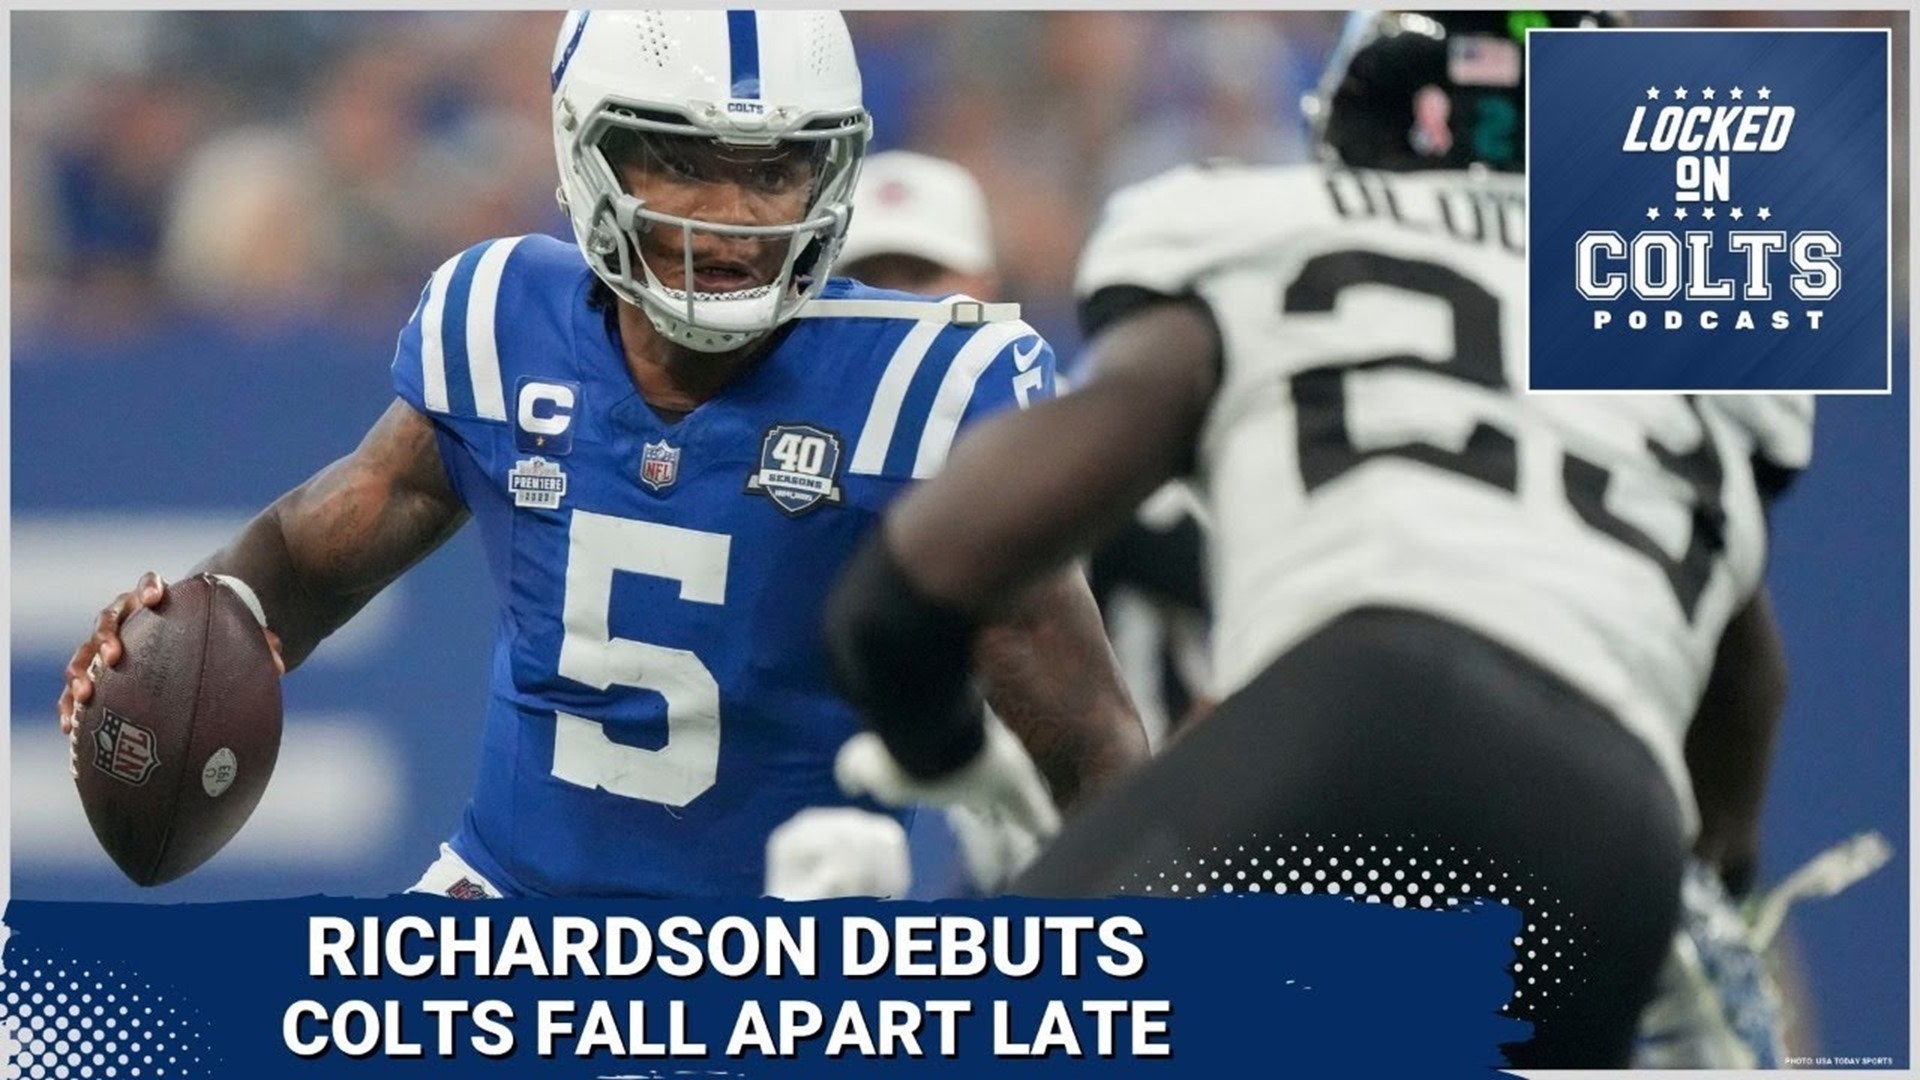 Anthony Richardson and the Indianapolis Colts lost to the Jacksonville Jaguars in the rookie quarterback's debut, 31-21.